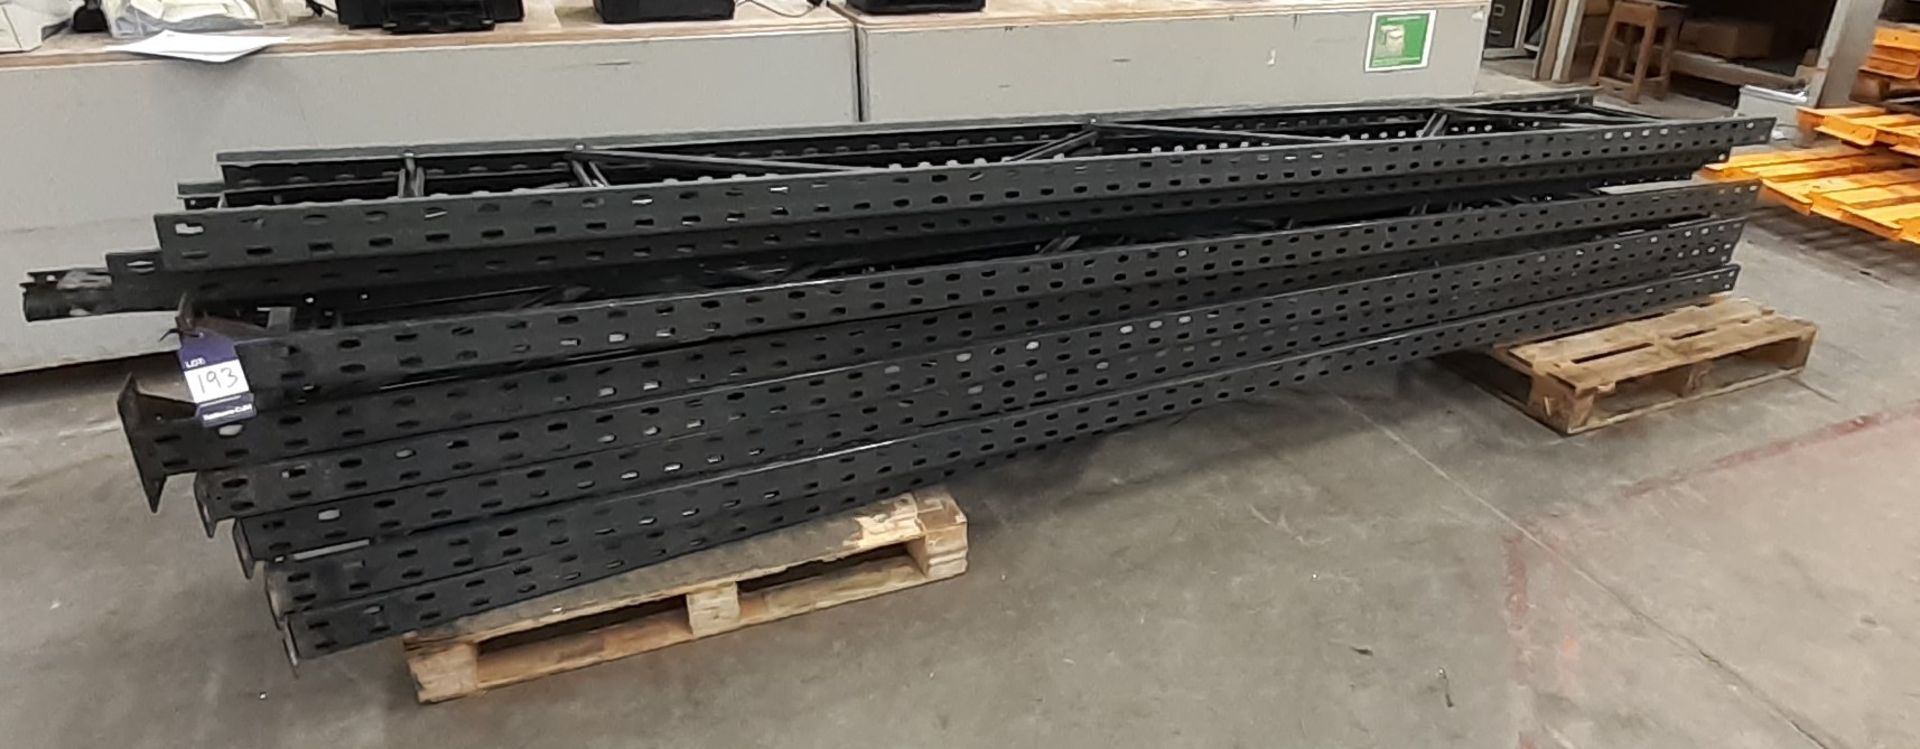 Dismantled Racking to pallets to include 8x uprights (3096 x 375), quantity of lengths to pallet (